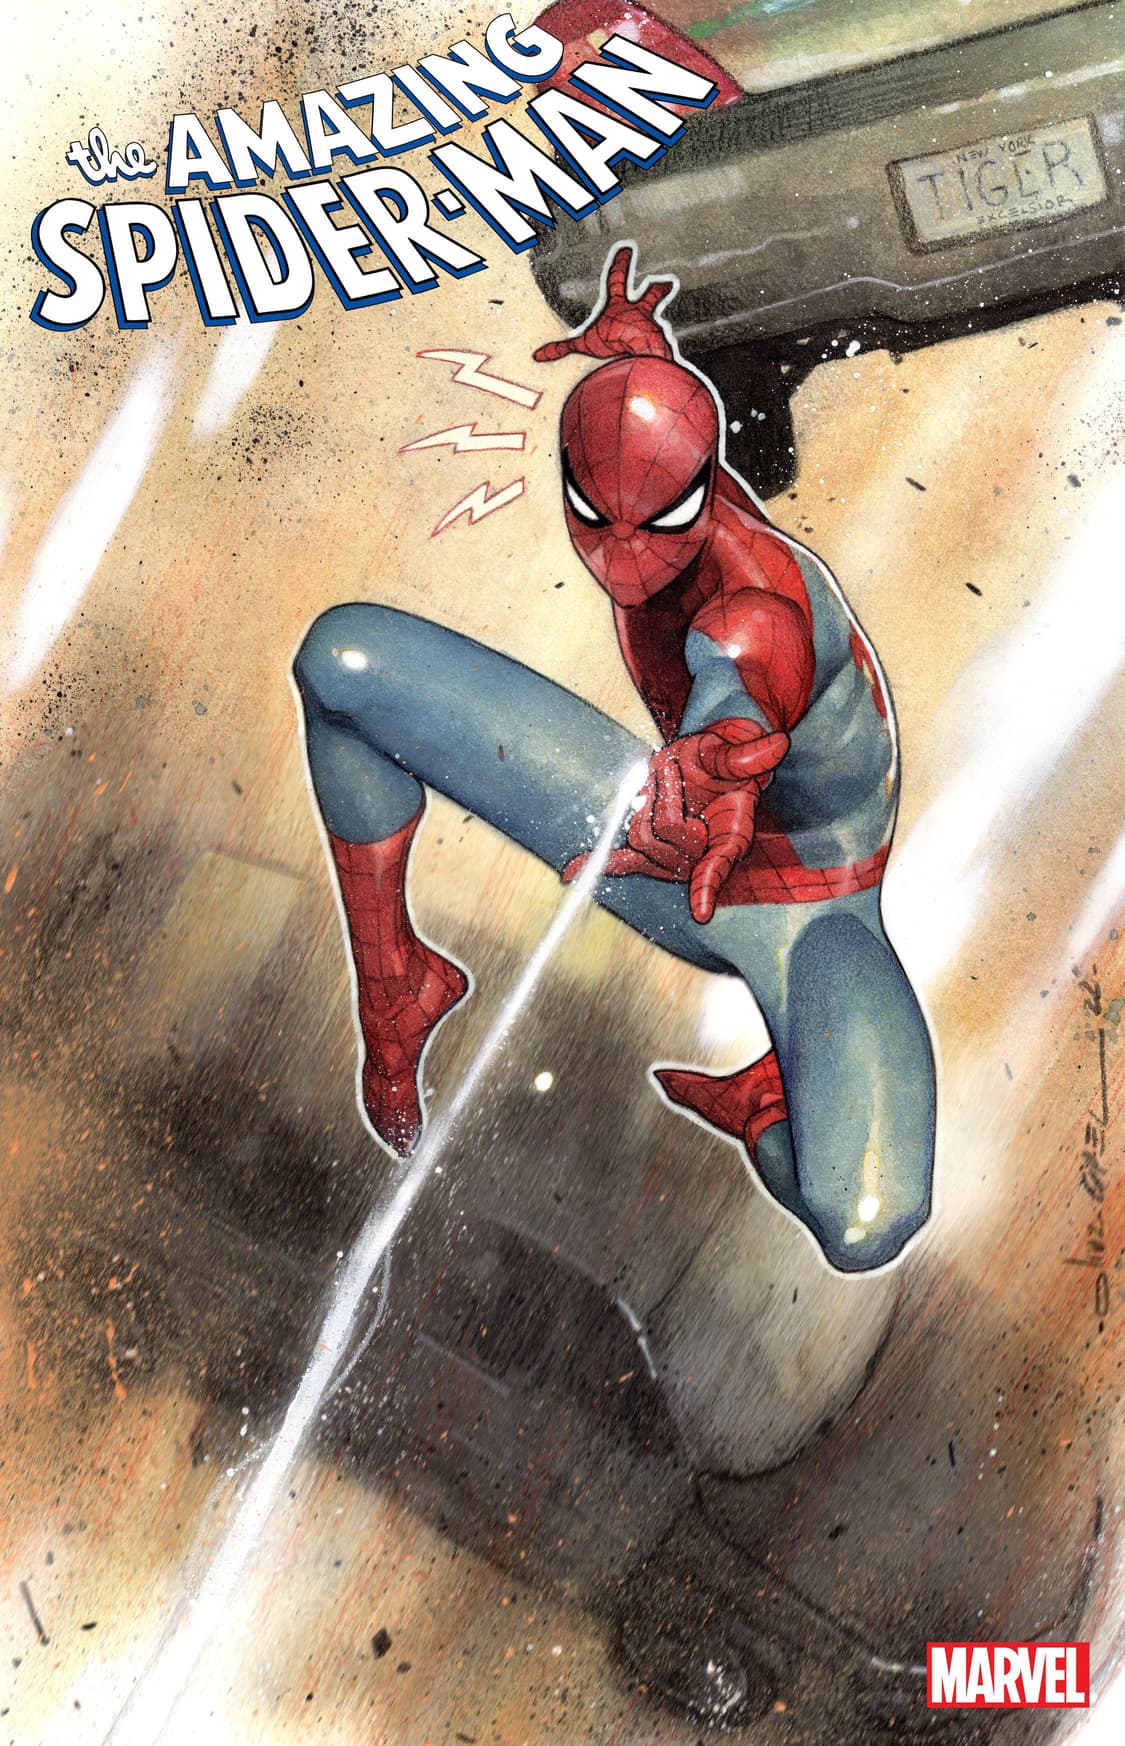 AMAZING SPIDER-MAN #26 variant cover by Olivier Coipel